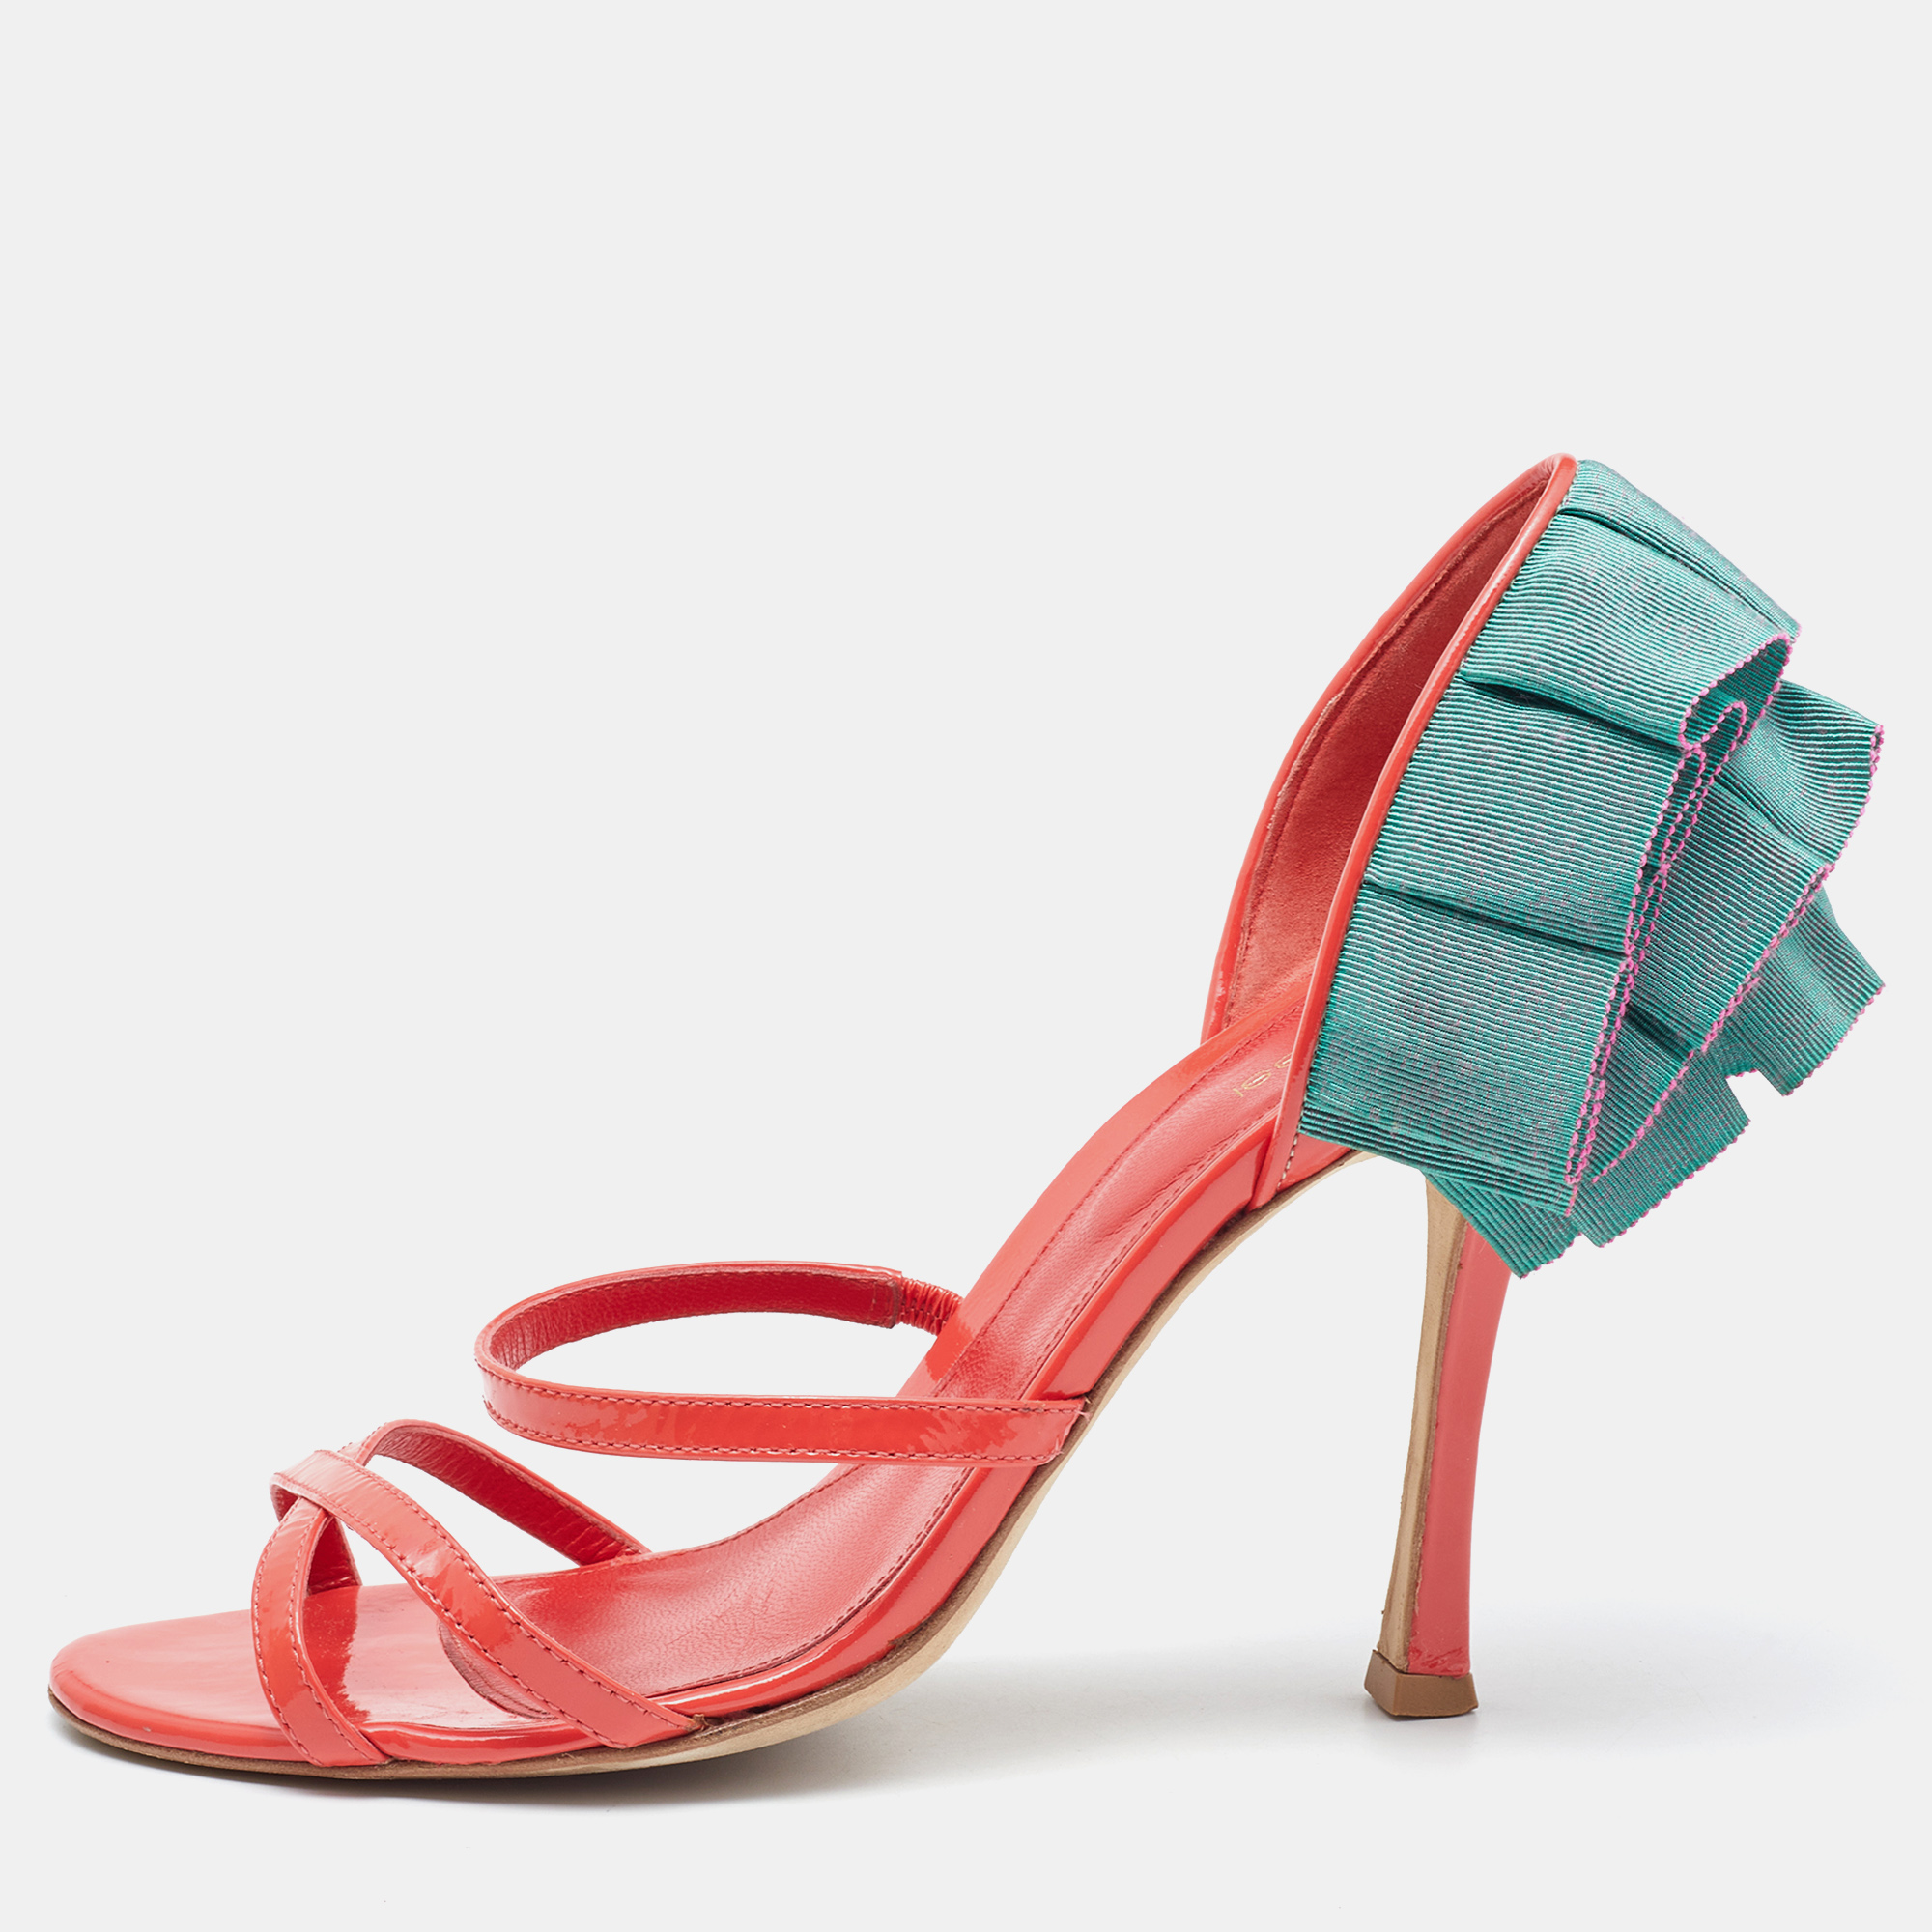 Sergio Rossi Coral/Green Patent Leather Strappy Sandals Size 39